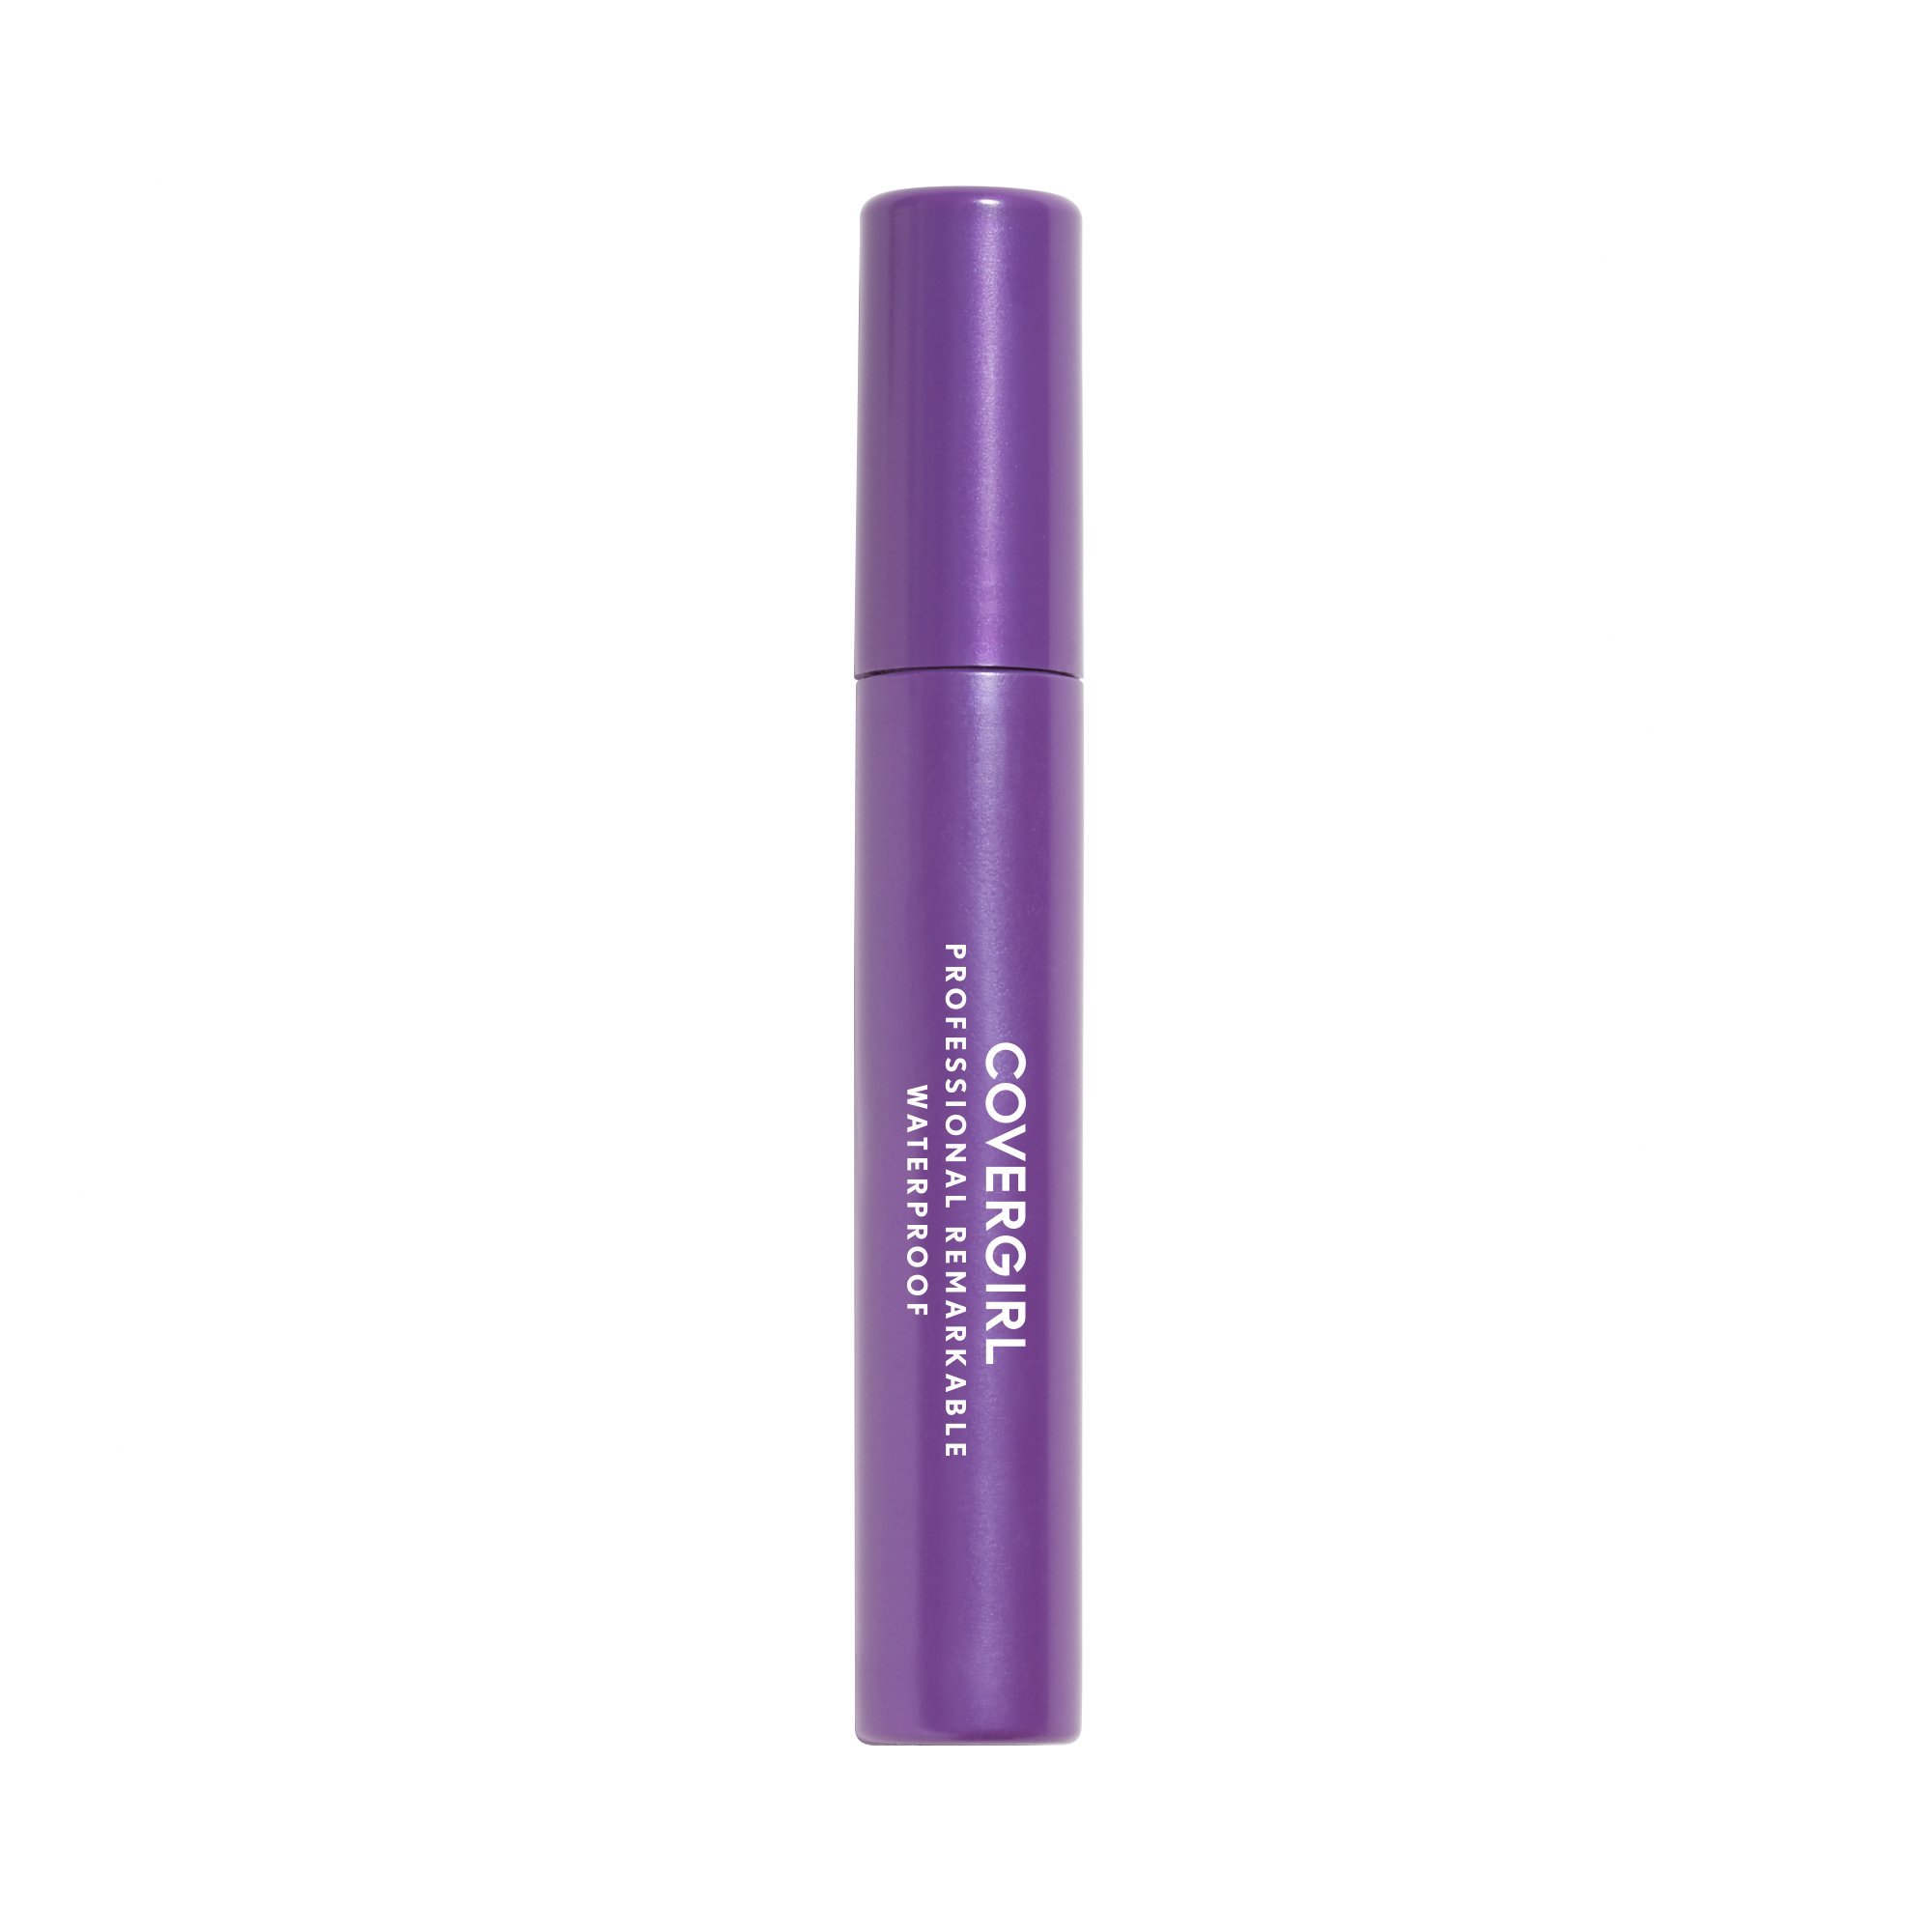 COVERGIRL Professional & Remarkable Mascara Black Brown, Long Lasting, 0.3 Fl Oz, Smudge-Proof Mascara, Voluminous Mascara, Lengthening Mascara, Resists Swipes and Smears, Darkens and Defines All Day